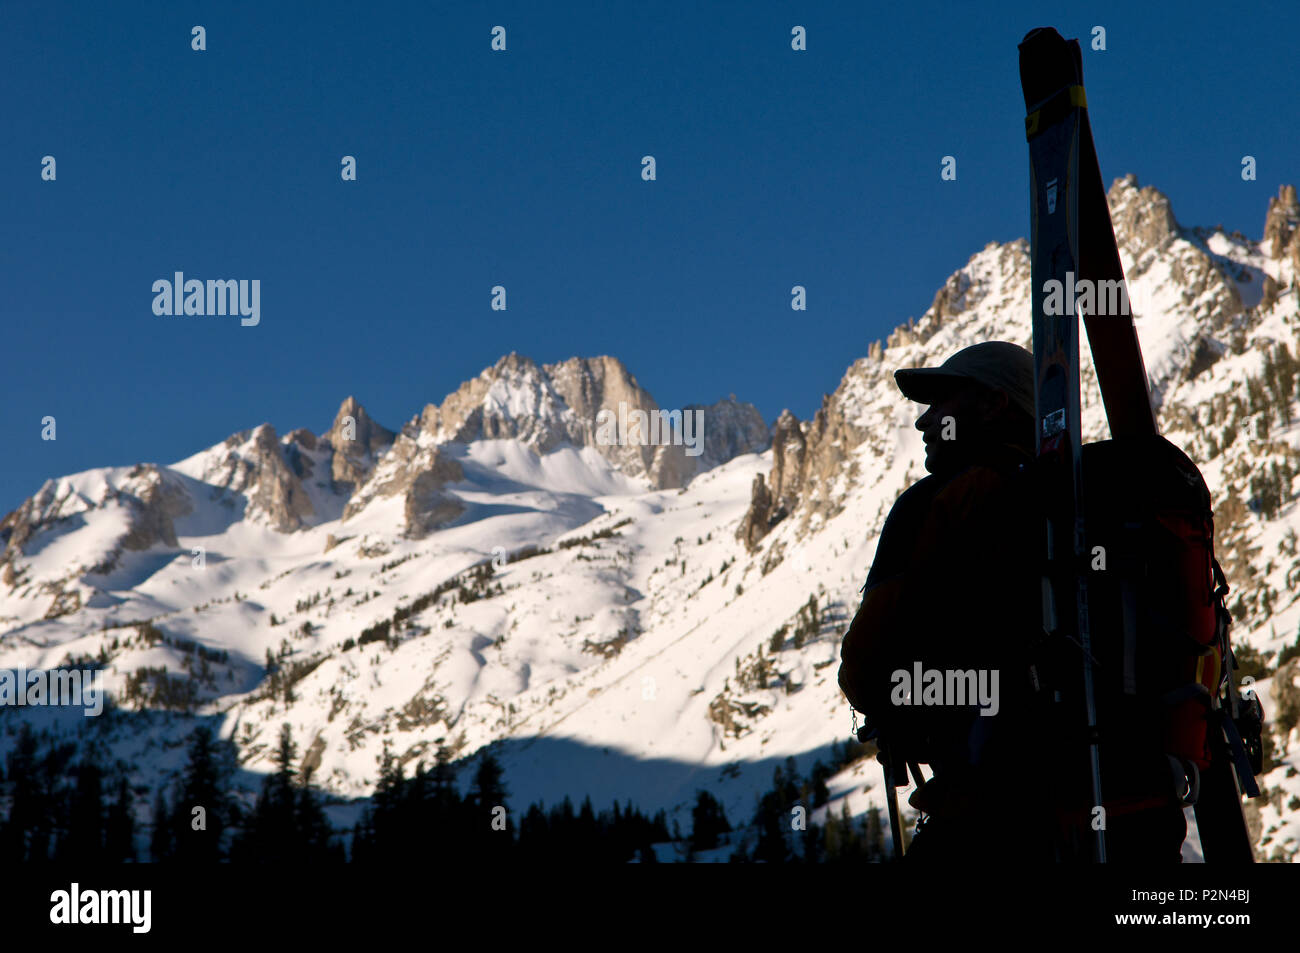 Backcountry skier in silhouette with ski gear and mountains below Matterhorn peak in the High Sierra, California, USA. Stock Photo